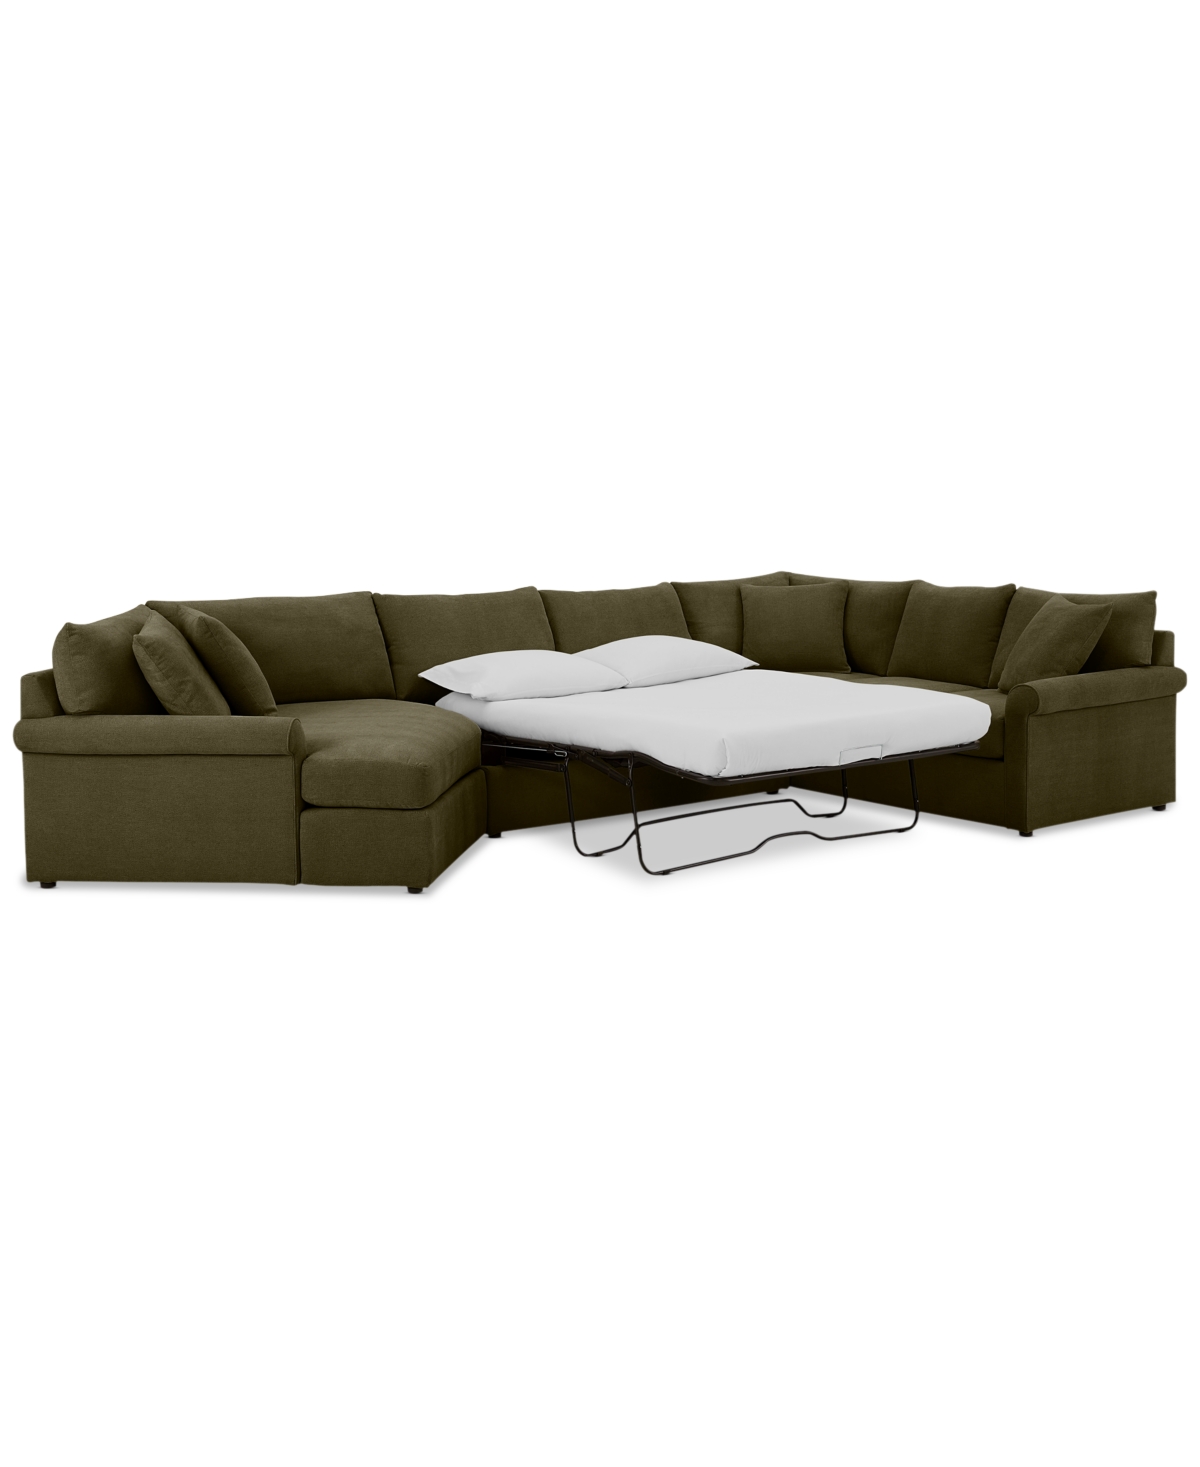 Furniture Wrenley 170" 3-pc. Fabric Sectional Full Sleeper Cuddler Chaise Sofa, Created For Macy's In Olive